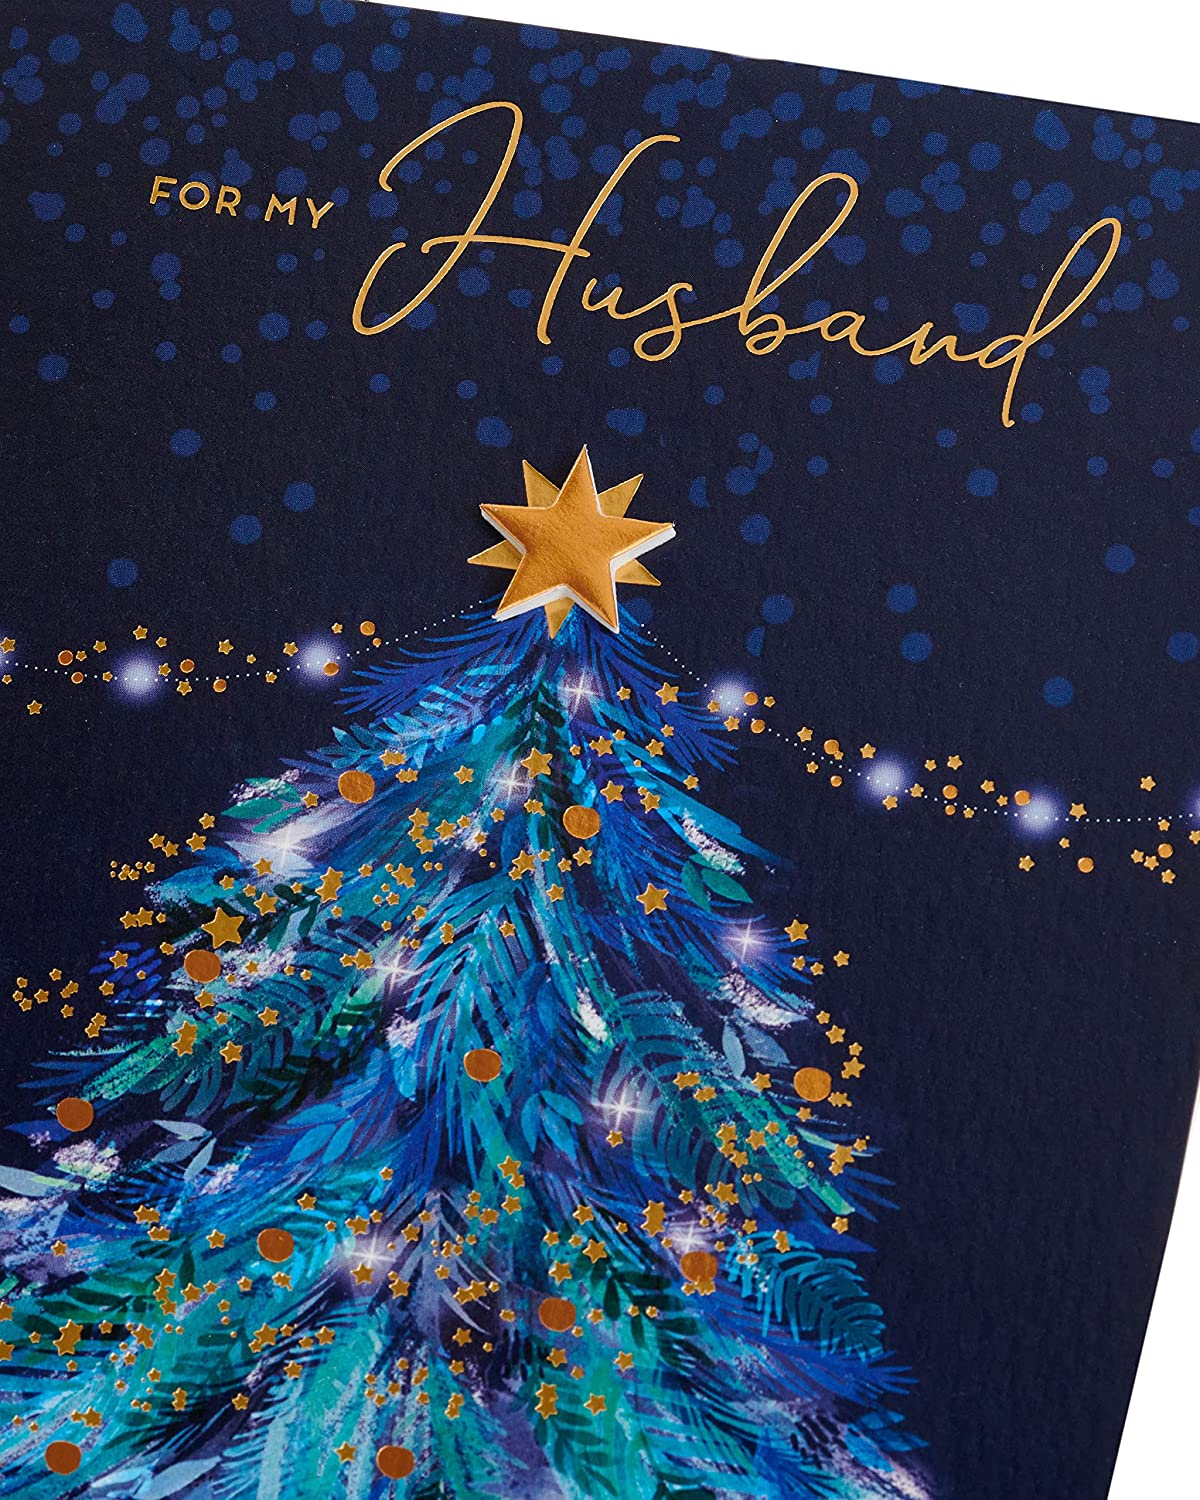 Beautiful Tree Finished with Exquisite Foil and Flitter Details Husband Christmas Card